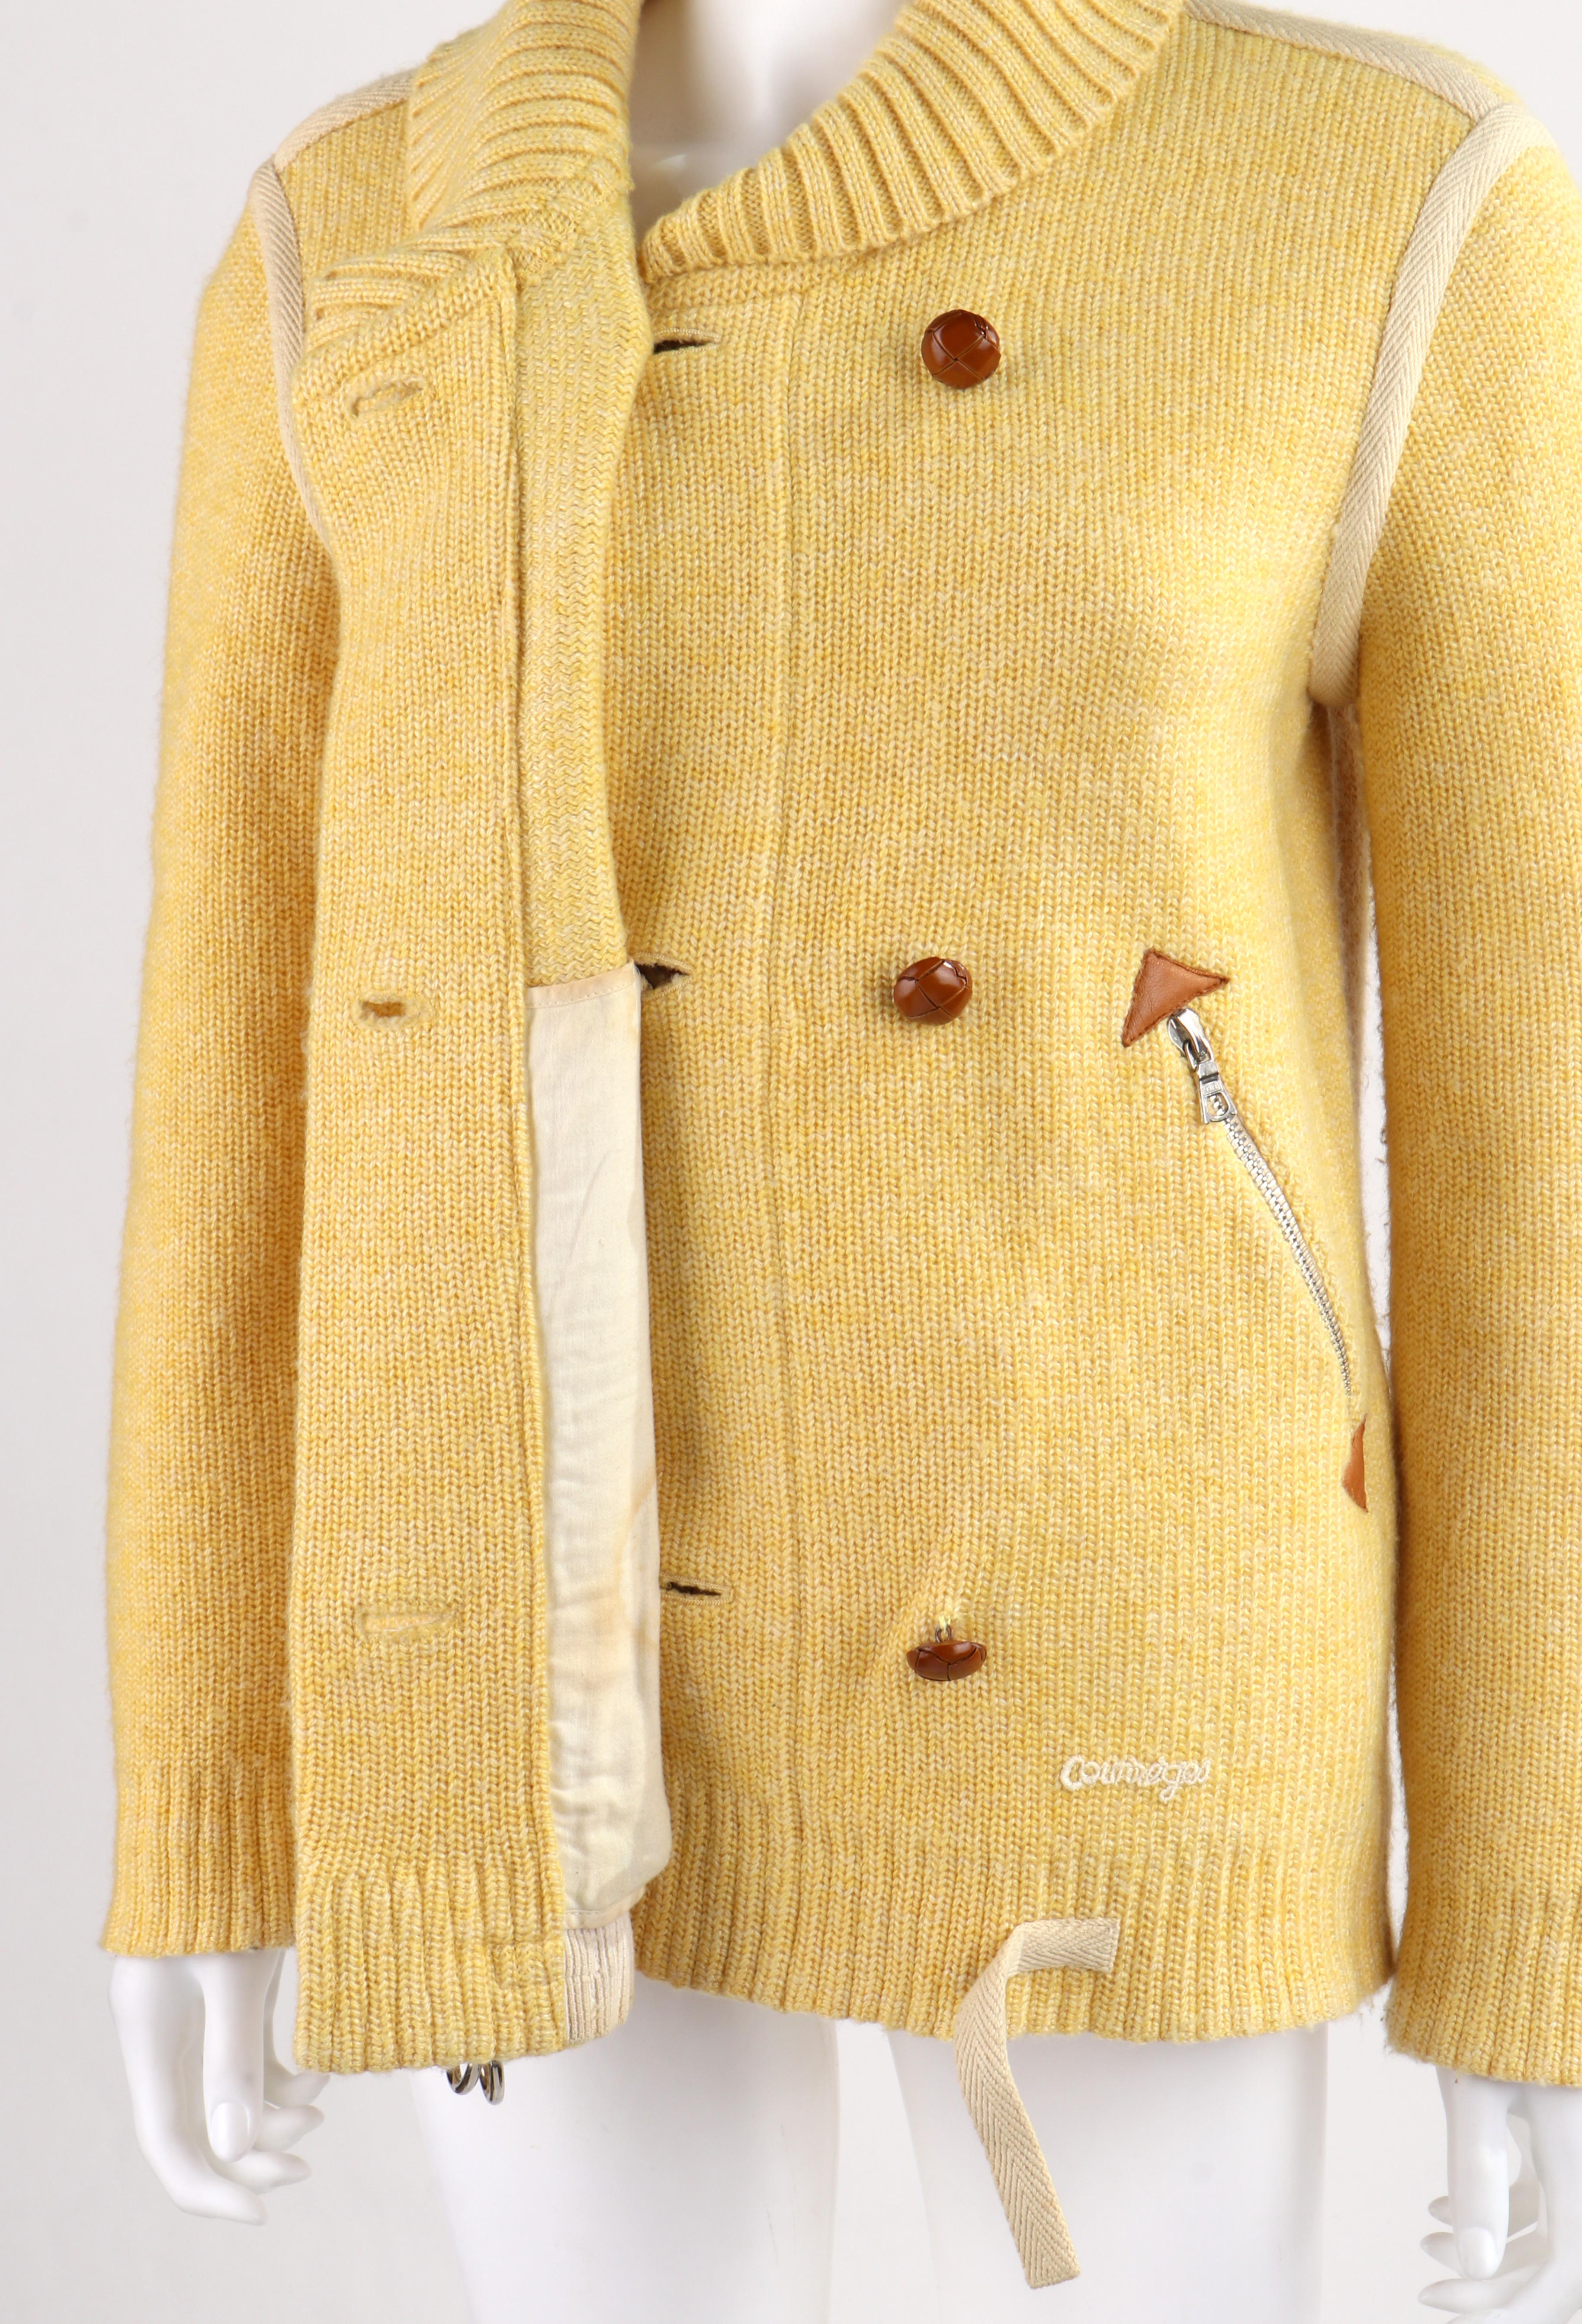 COURREGES c.1980’s Yellow Knit Double Breasted Leather Cardigan Sweater Jacket 2